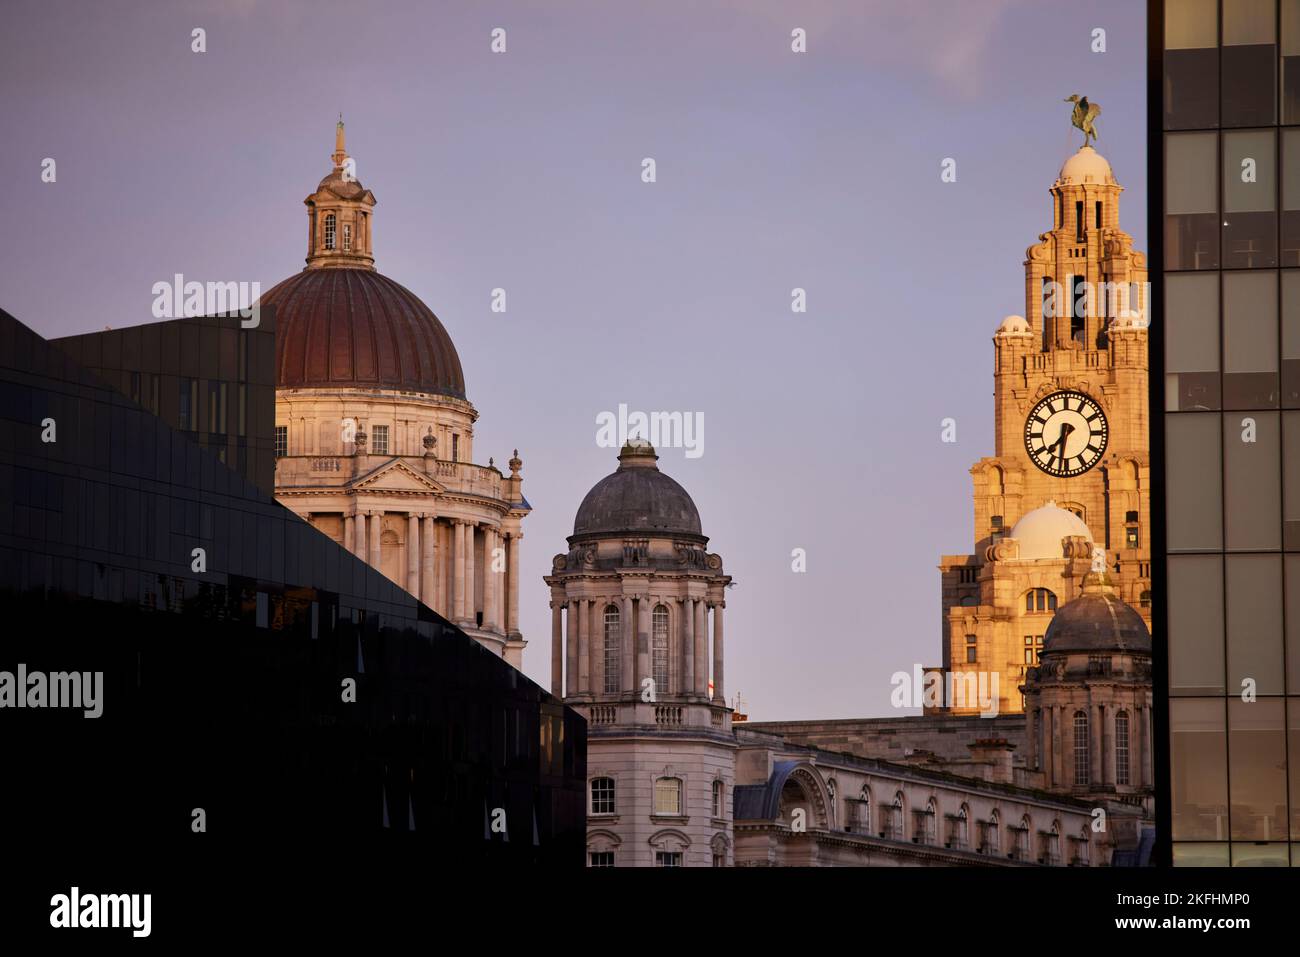 The Royal Liver Building Grade I listed building in Liverpool, England Stock Photo